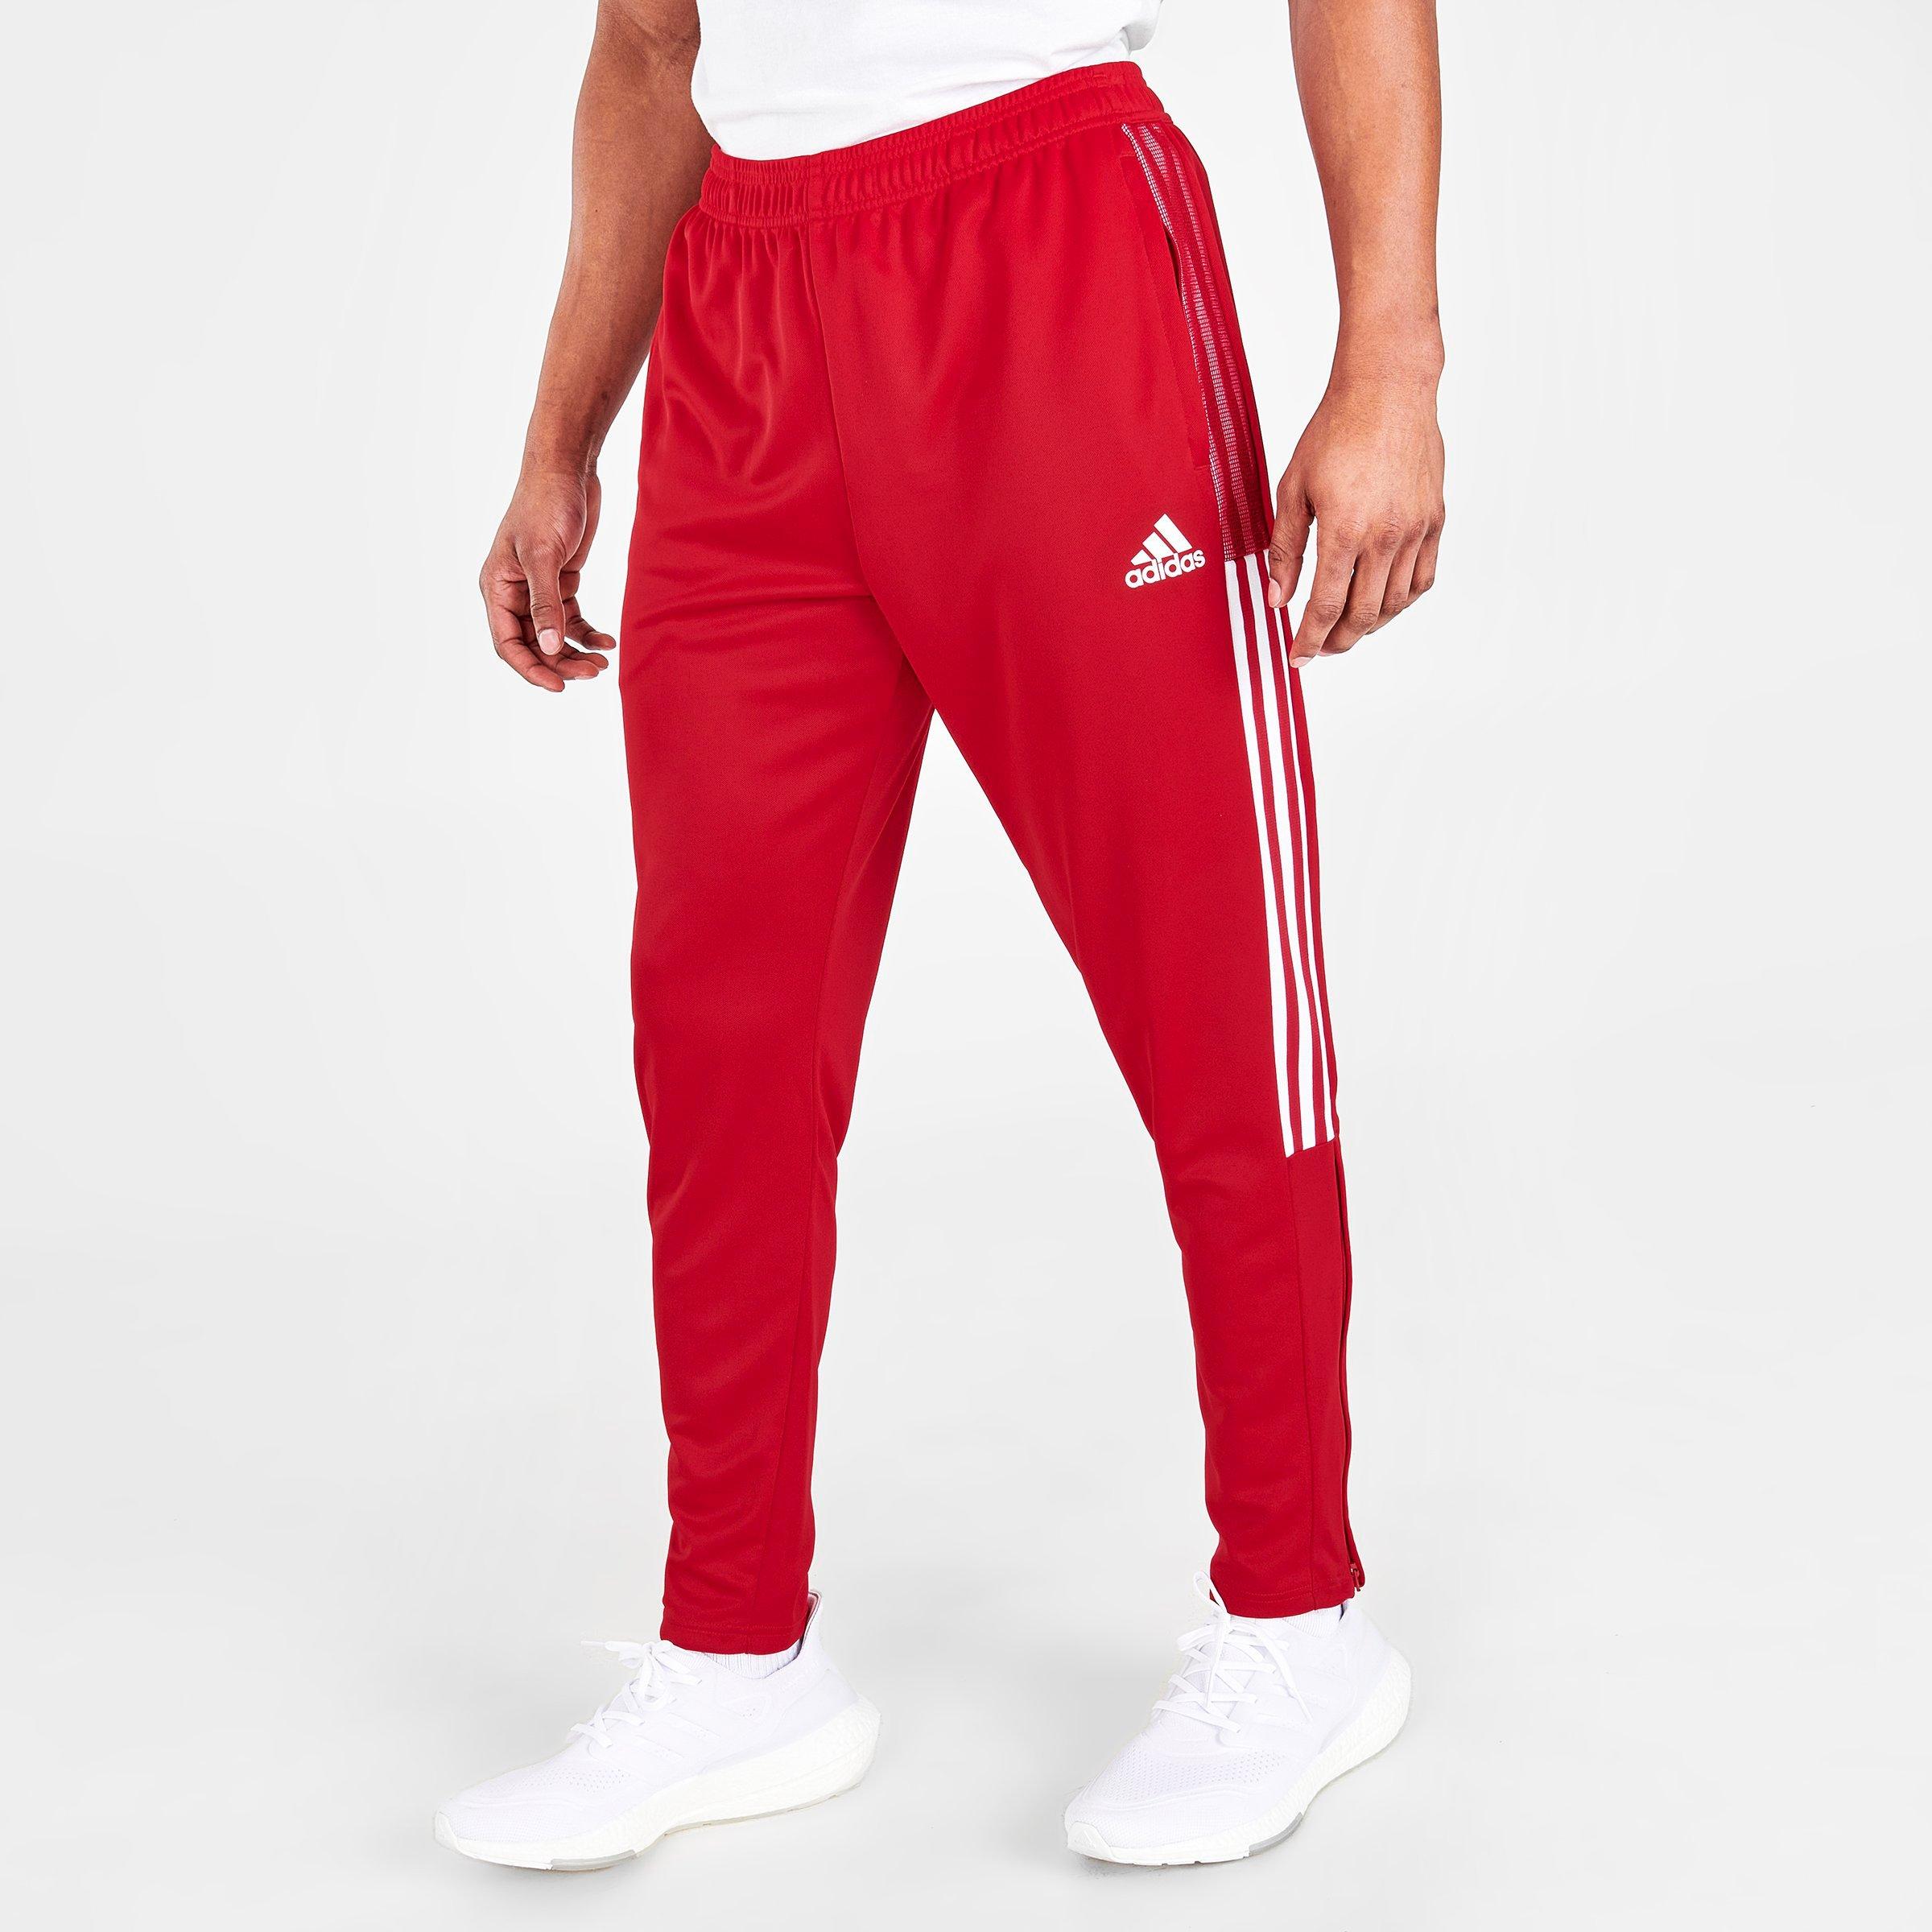 Shop Now For The Adidas Men's Tiro 21 Track Pants in Red/Team Power Red ...